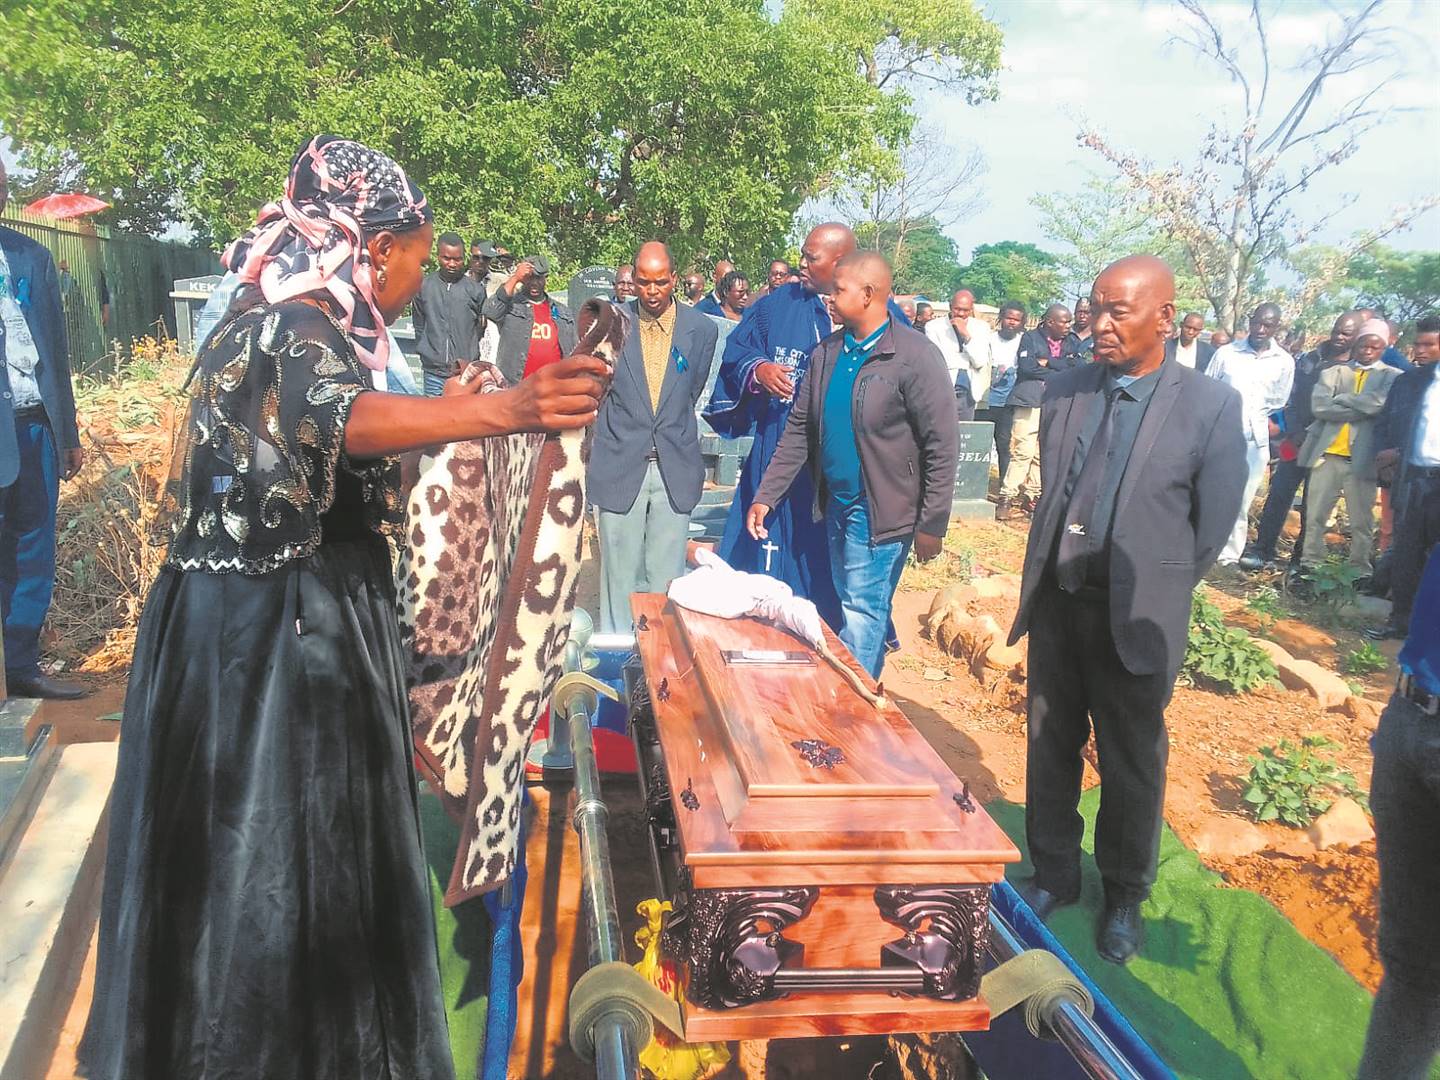 Mourners paying their last respects at the funeral of Amos Junior Ndlovu in Mandela Village on Sunday.    Photo by Raymond Morare